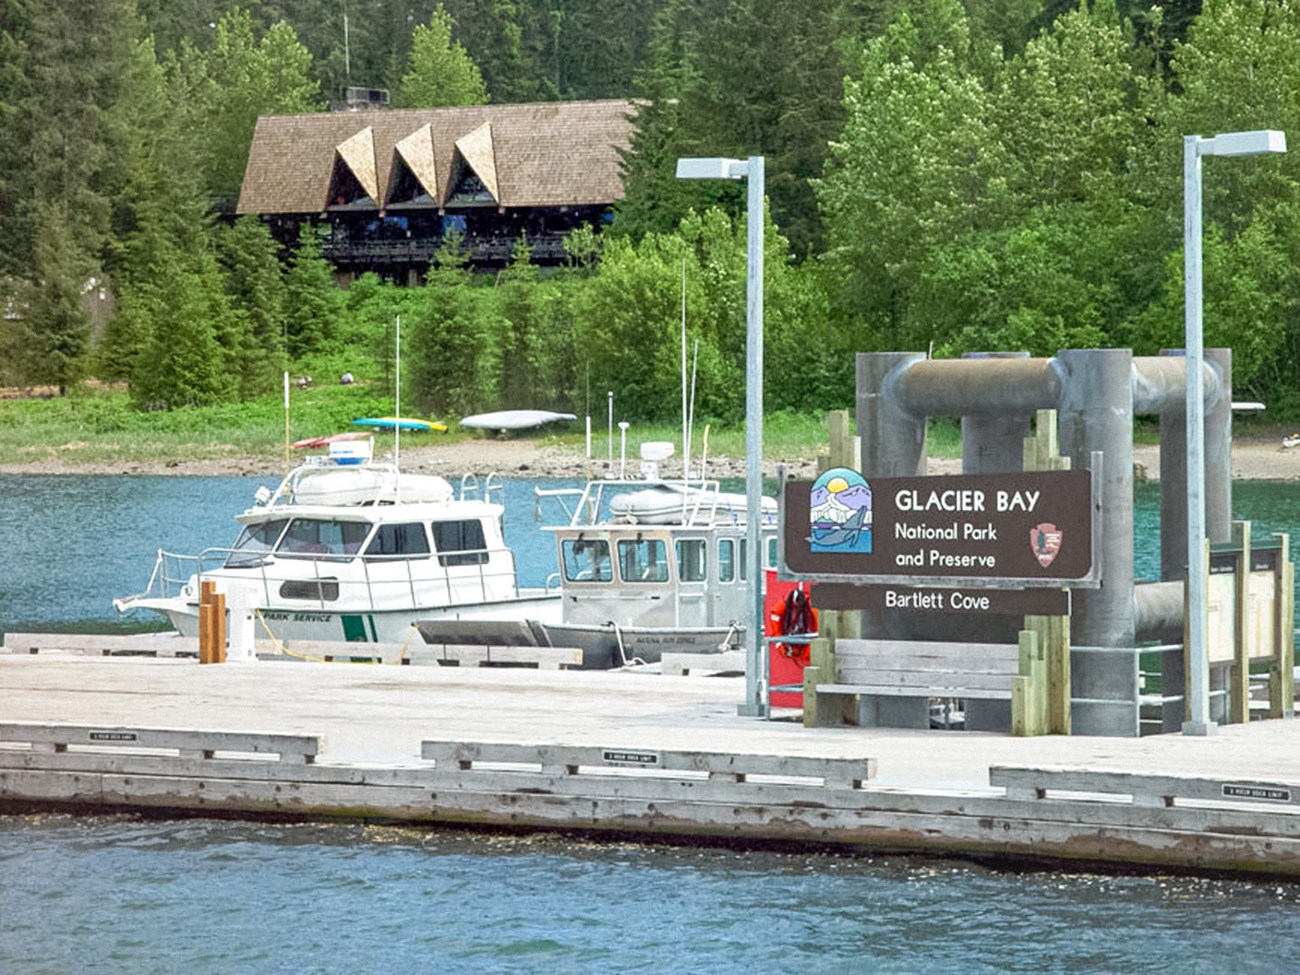 Glacier Bay welcome sign on the public dock with two NPS boats and Glacier Bay lodge in background on shore